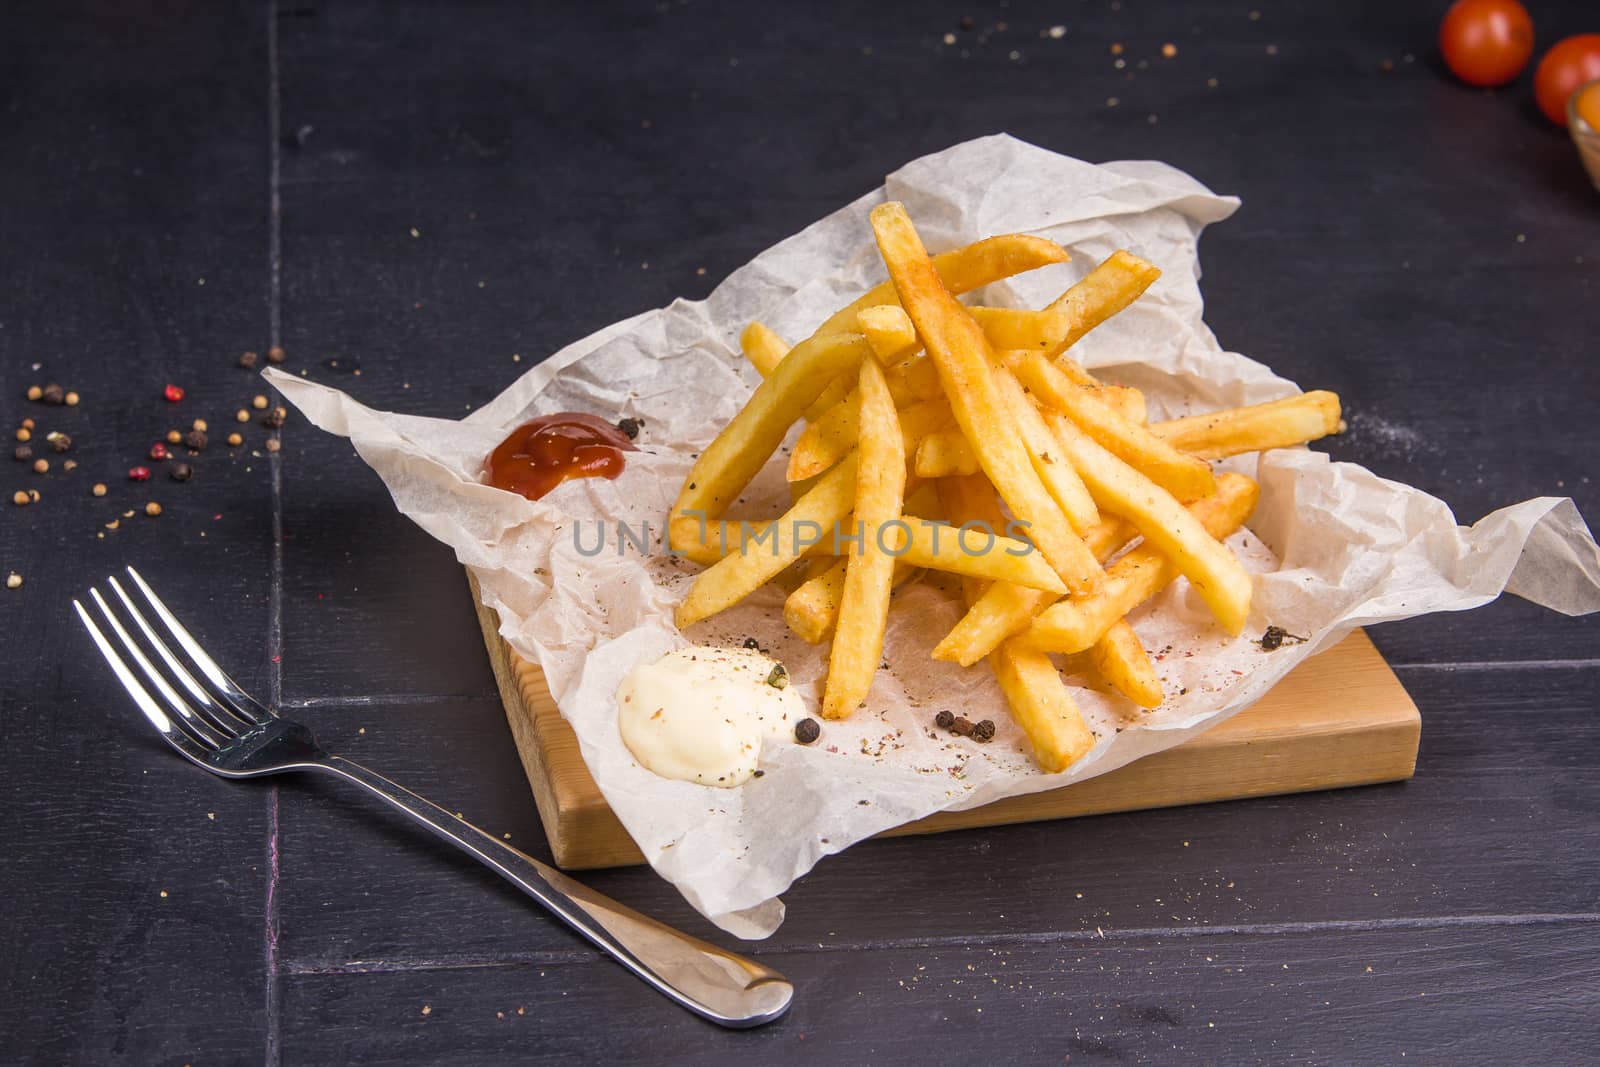 Homemade fries on a table by mrakor